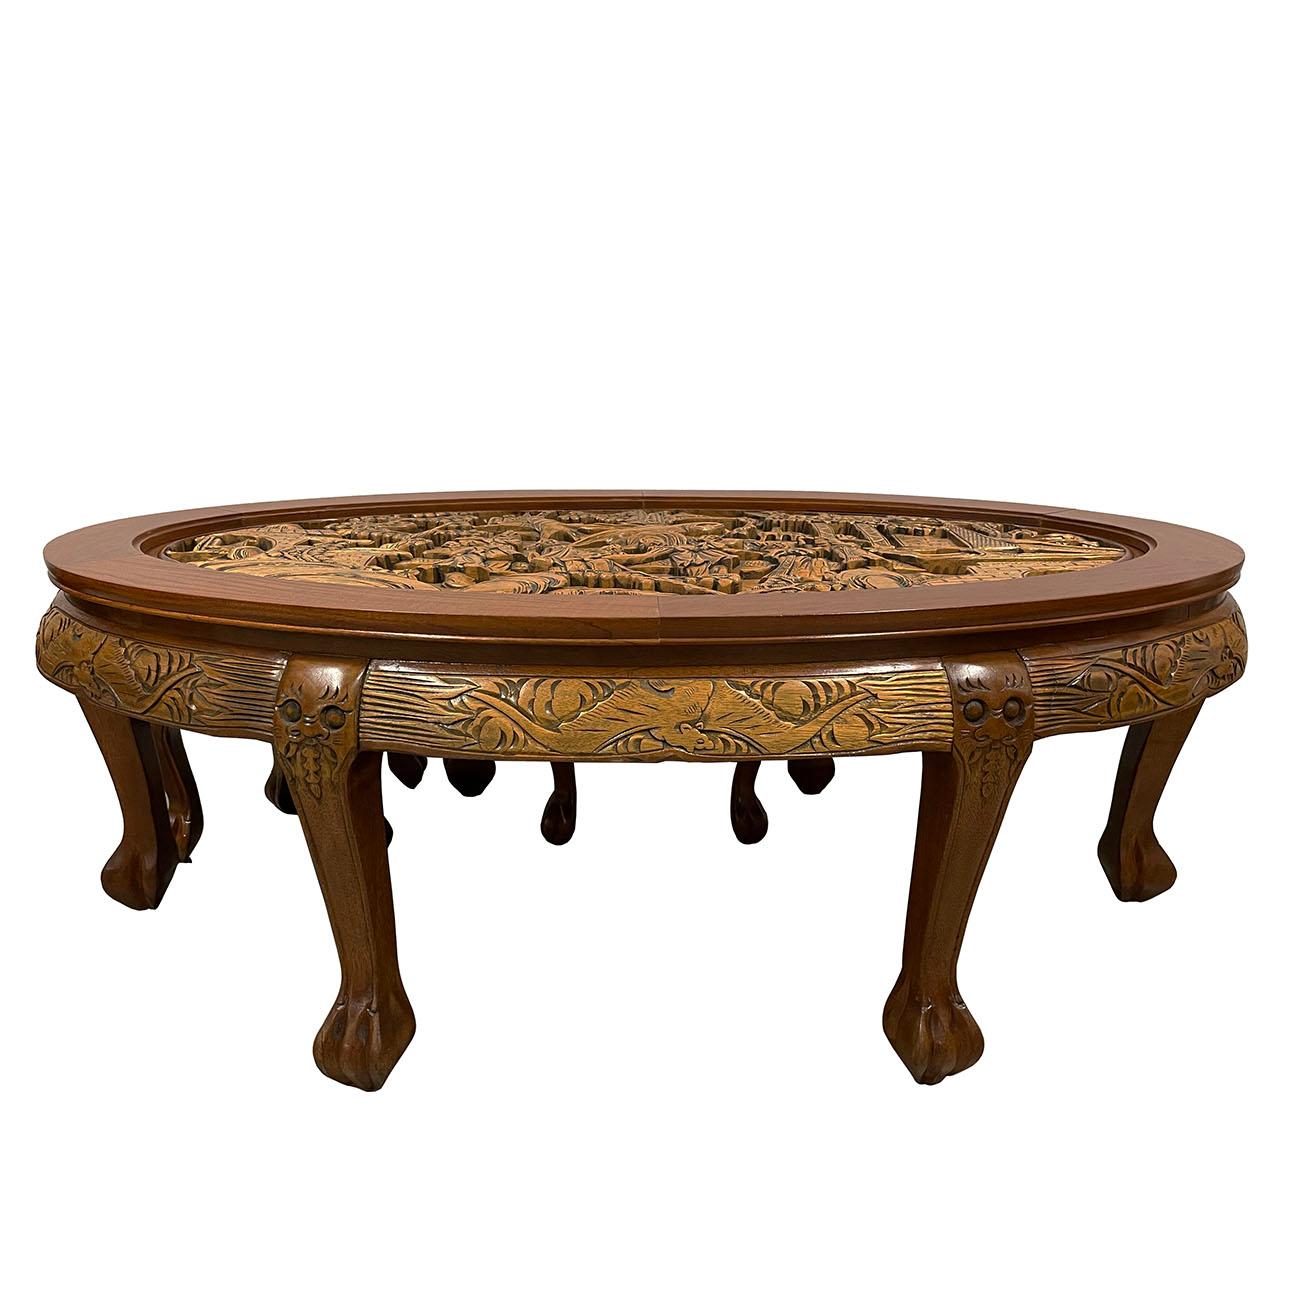 Hand-Carved Vintage Chinese Massive Carved Teak Wood Coffee Table with 6 Nesting Stools